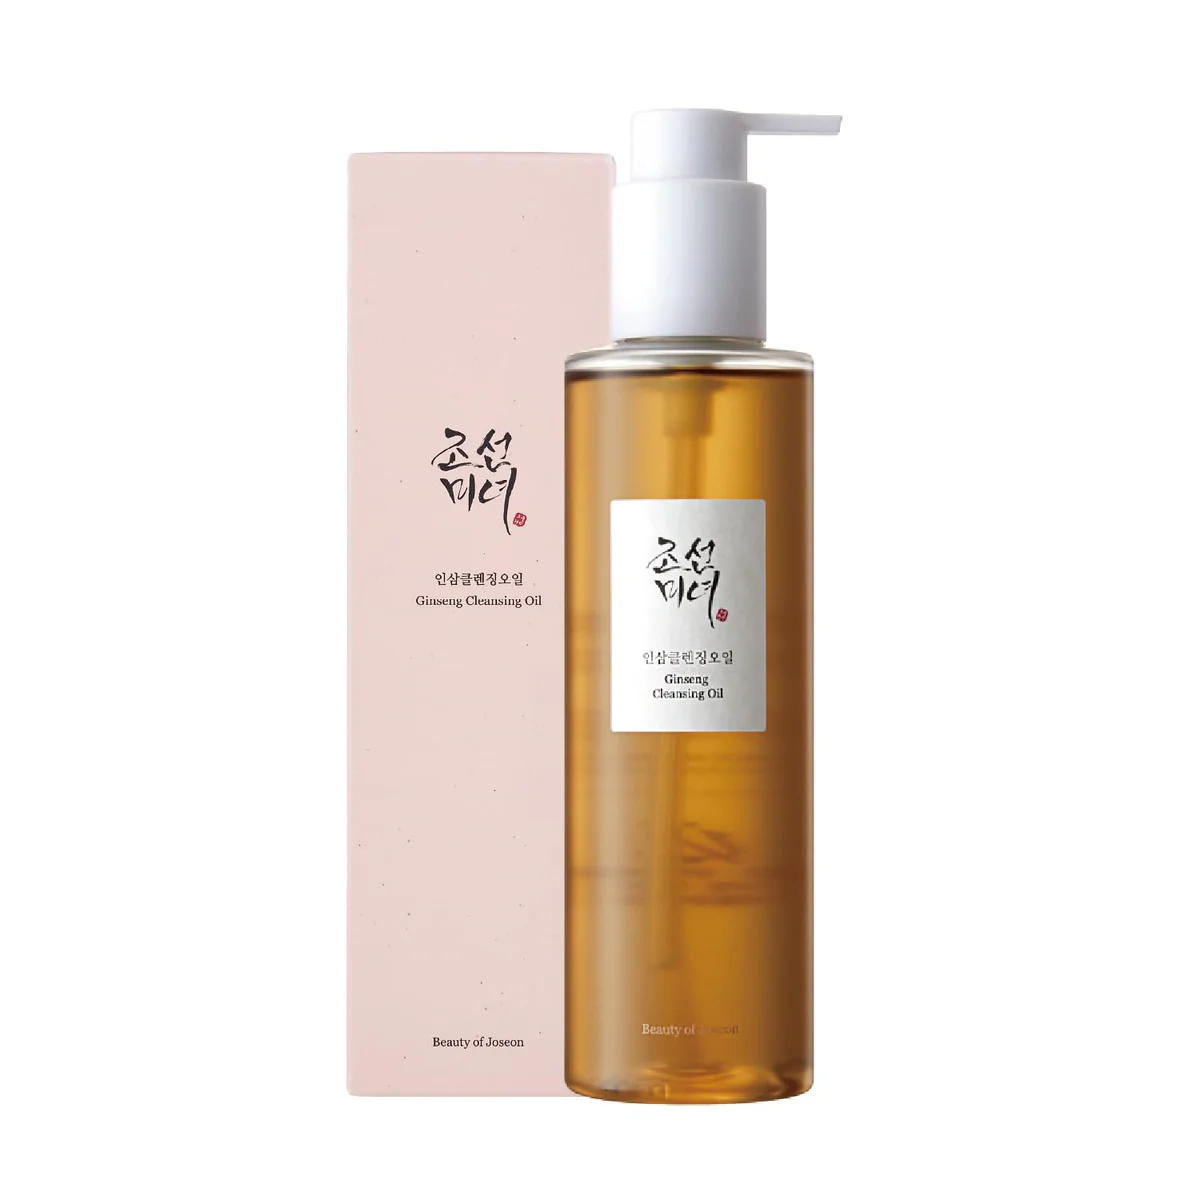 BEAUTY OF JOSEON - Ginseng Cleansing Oil Huile Nettoyante